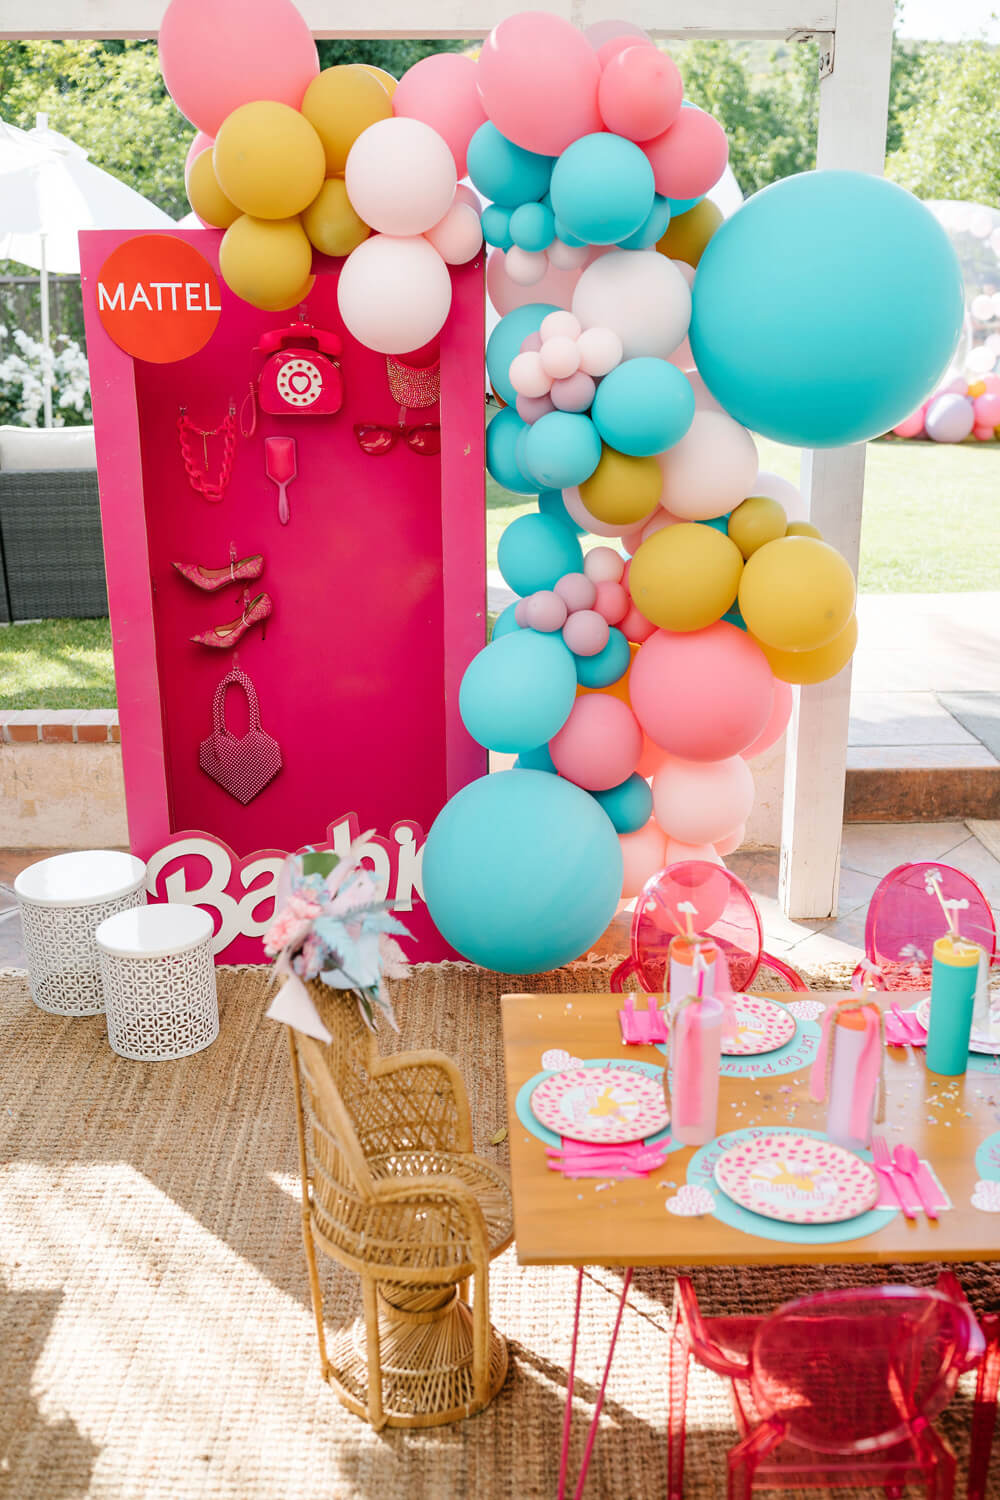 Barbie photobooth for girls birthday party